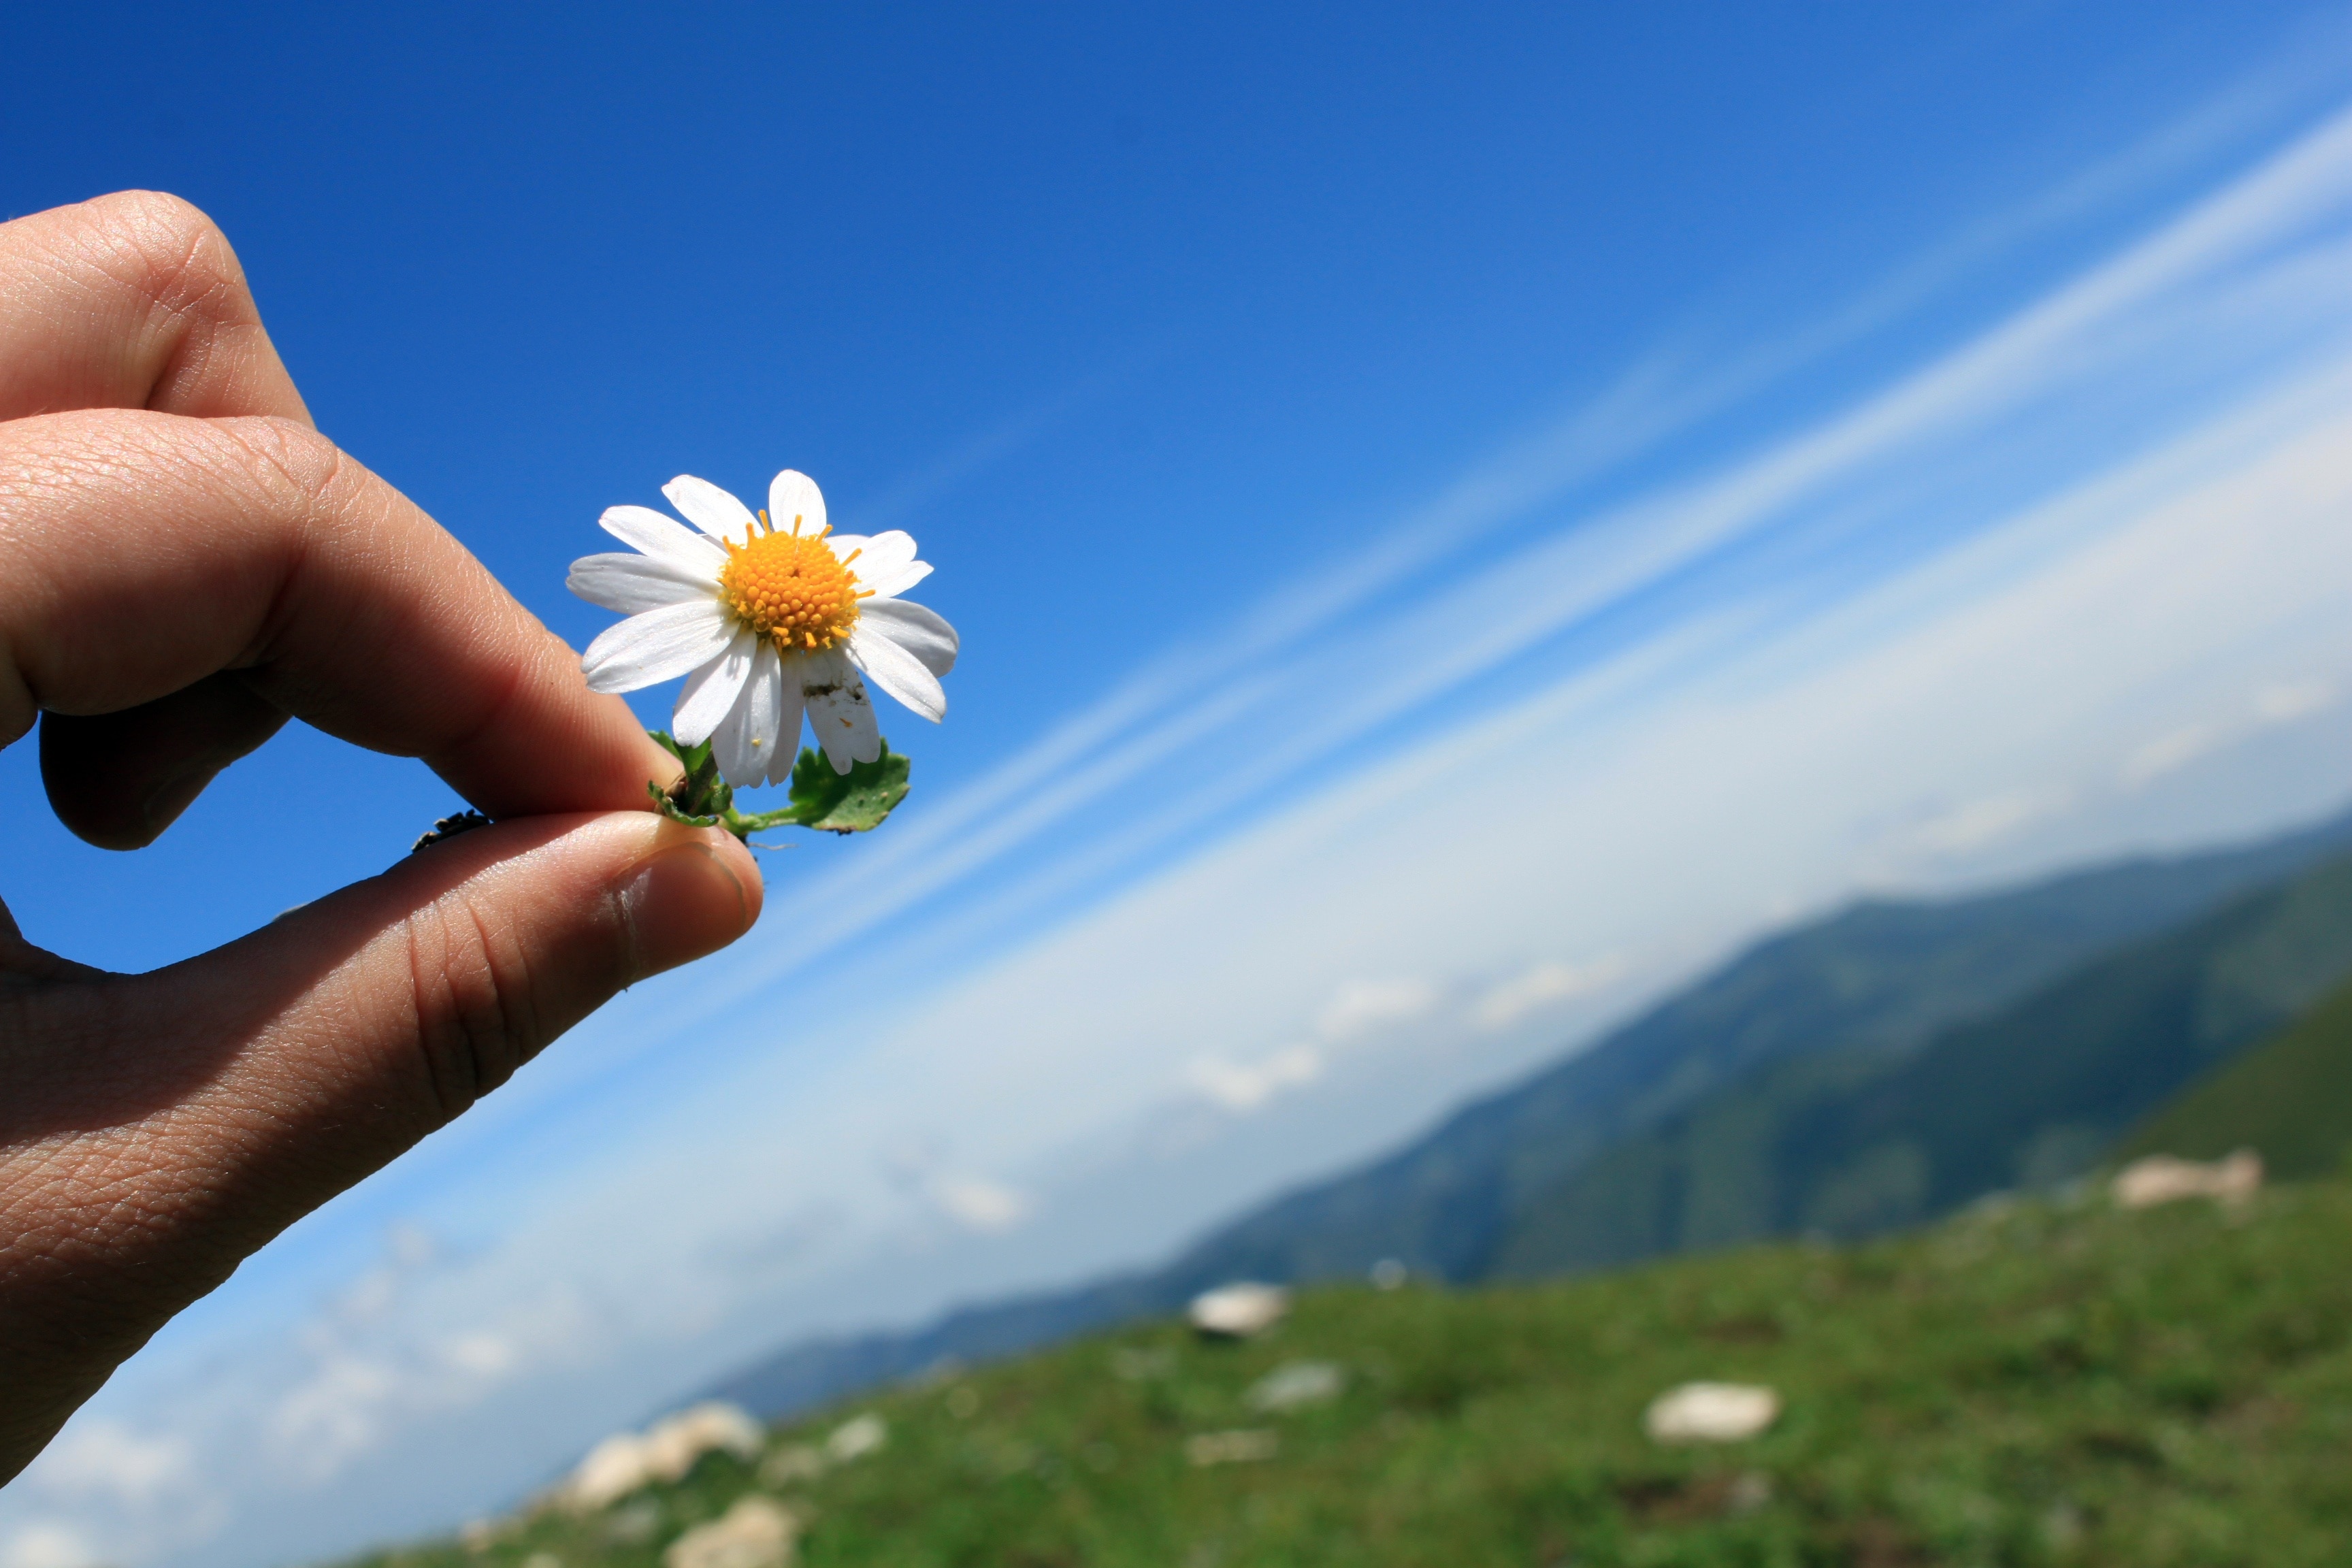 person holding white and yellow flower during daytime